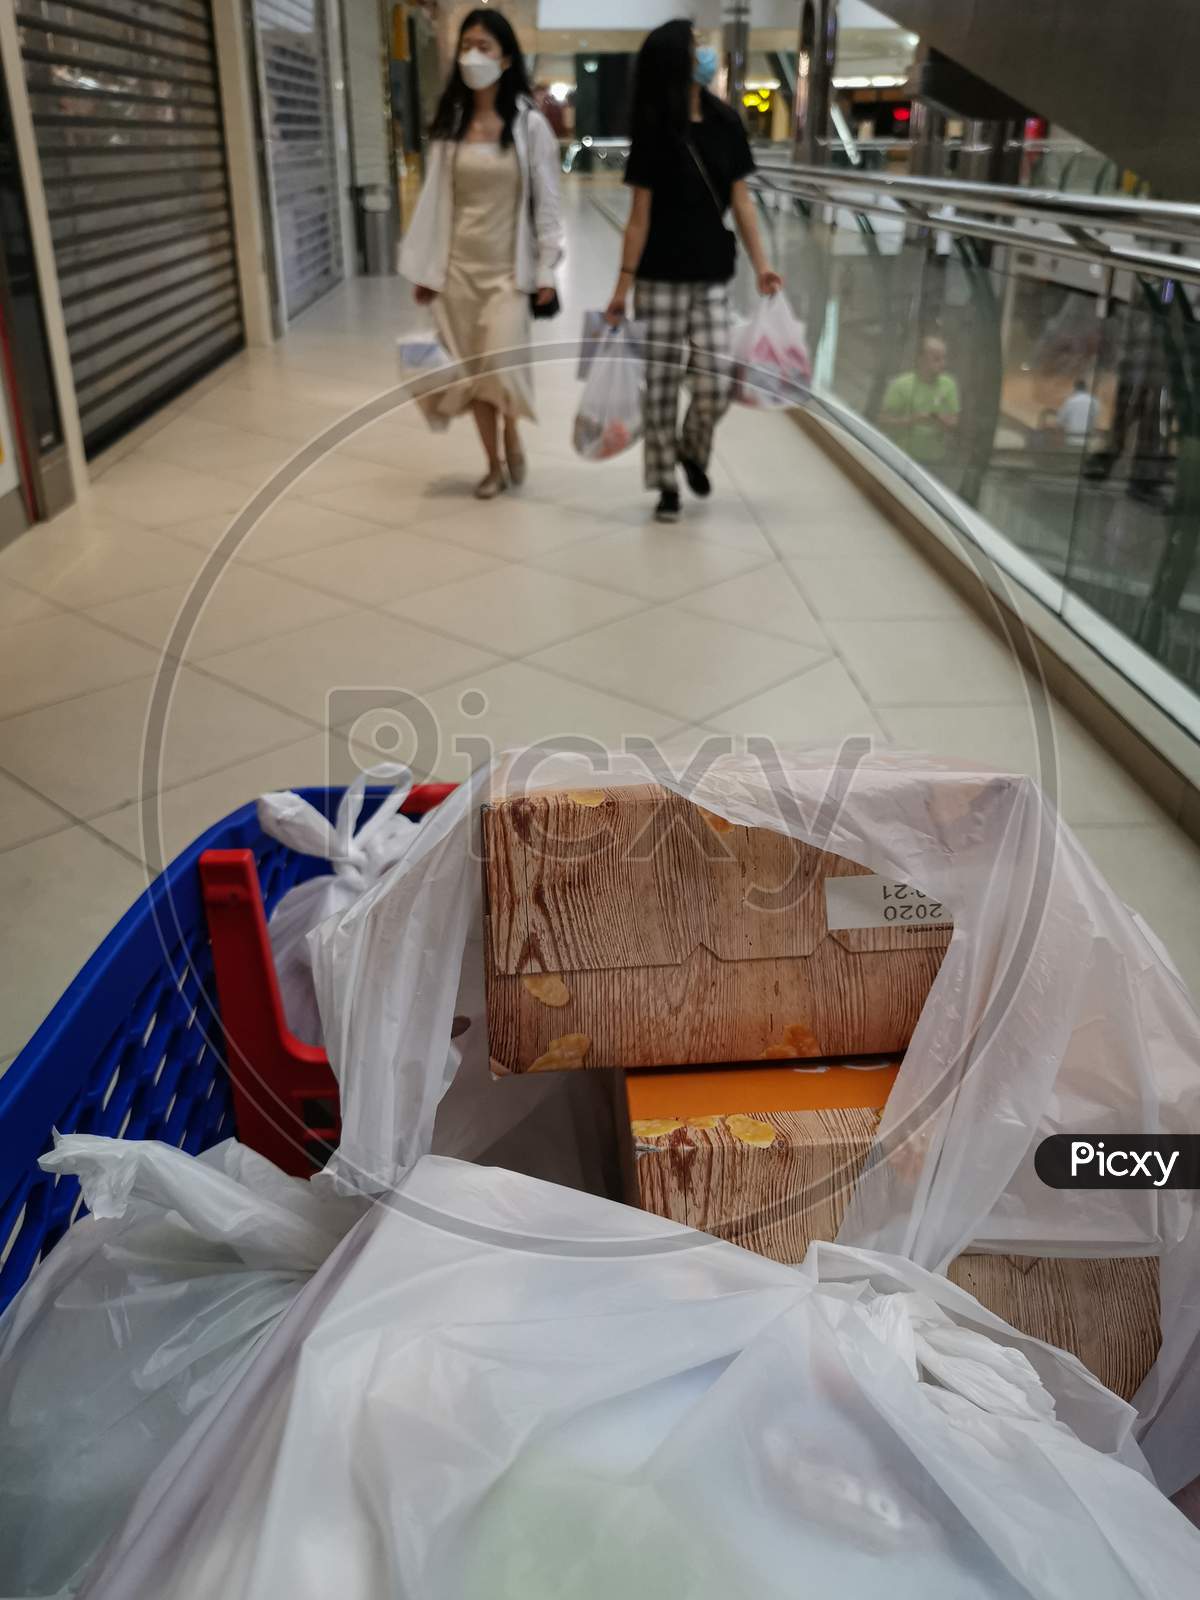 Corona virus safe shopping, the photo shows a shopping cart in the foreground and two walking women wearing medical masks and carrying shopping bags